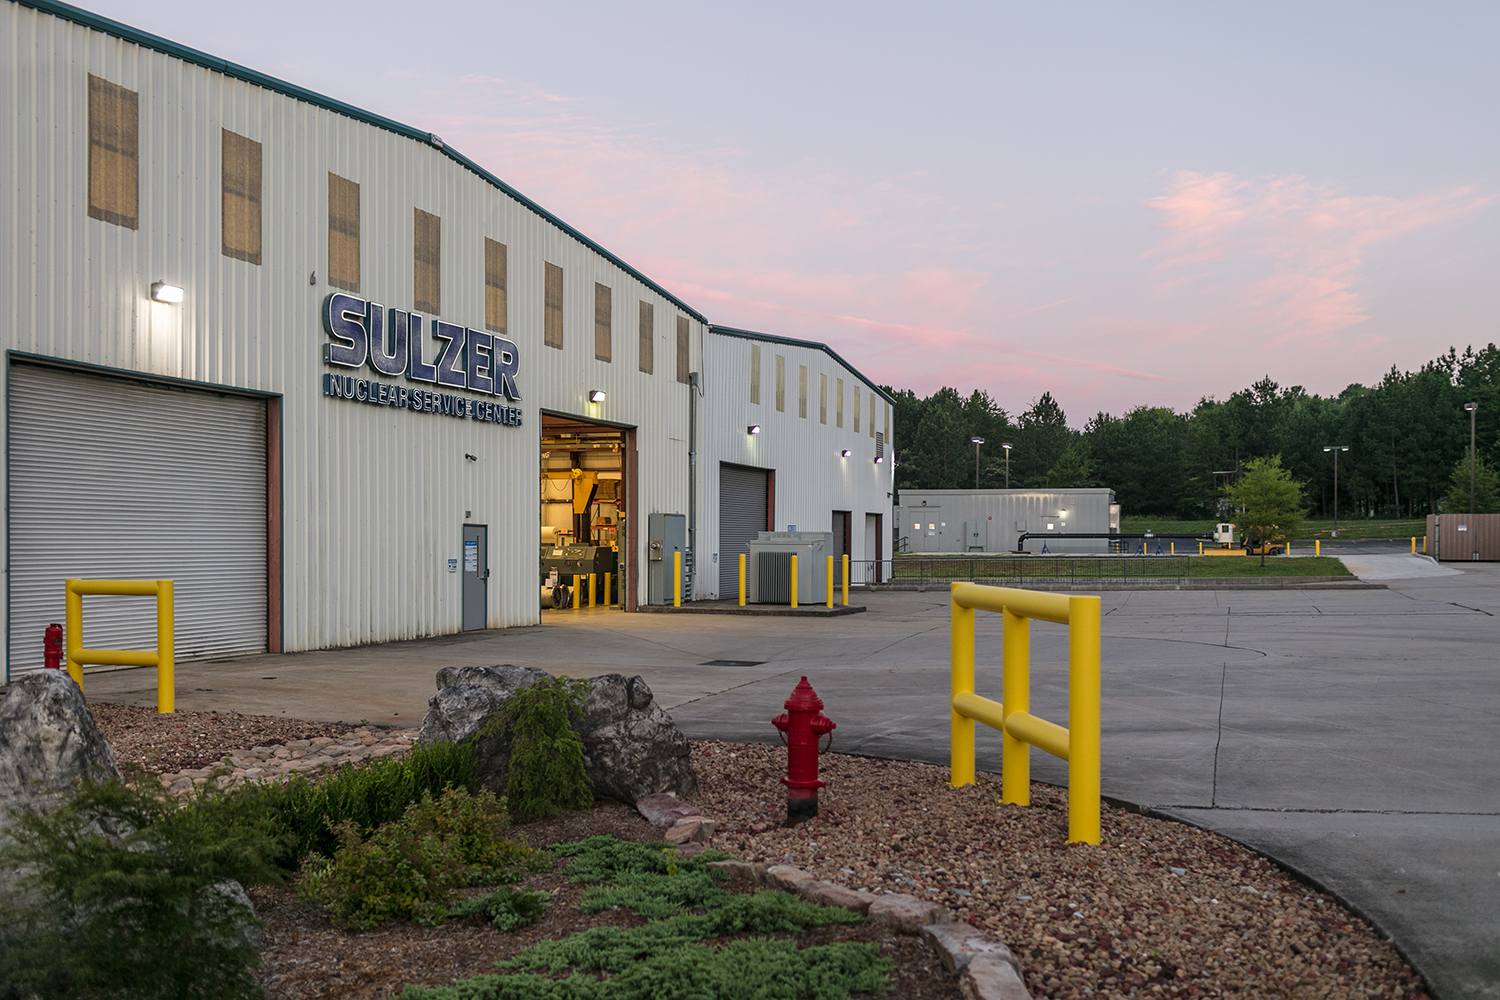 Sulzer’s expertise in pump design and manufacturing is world-renowned and within the organization one of the specialist service centers that provides support dedicated to this sector is located in Chattanooga, TN.